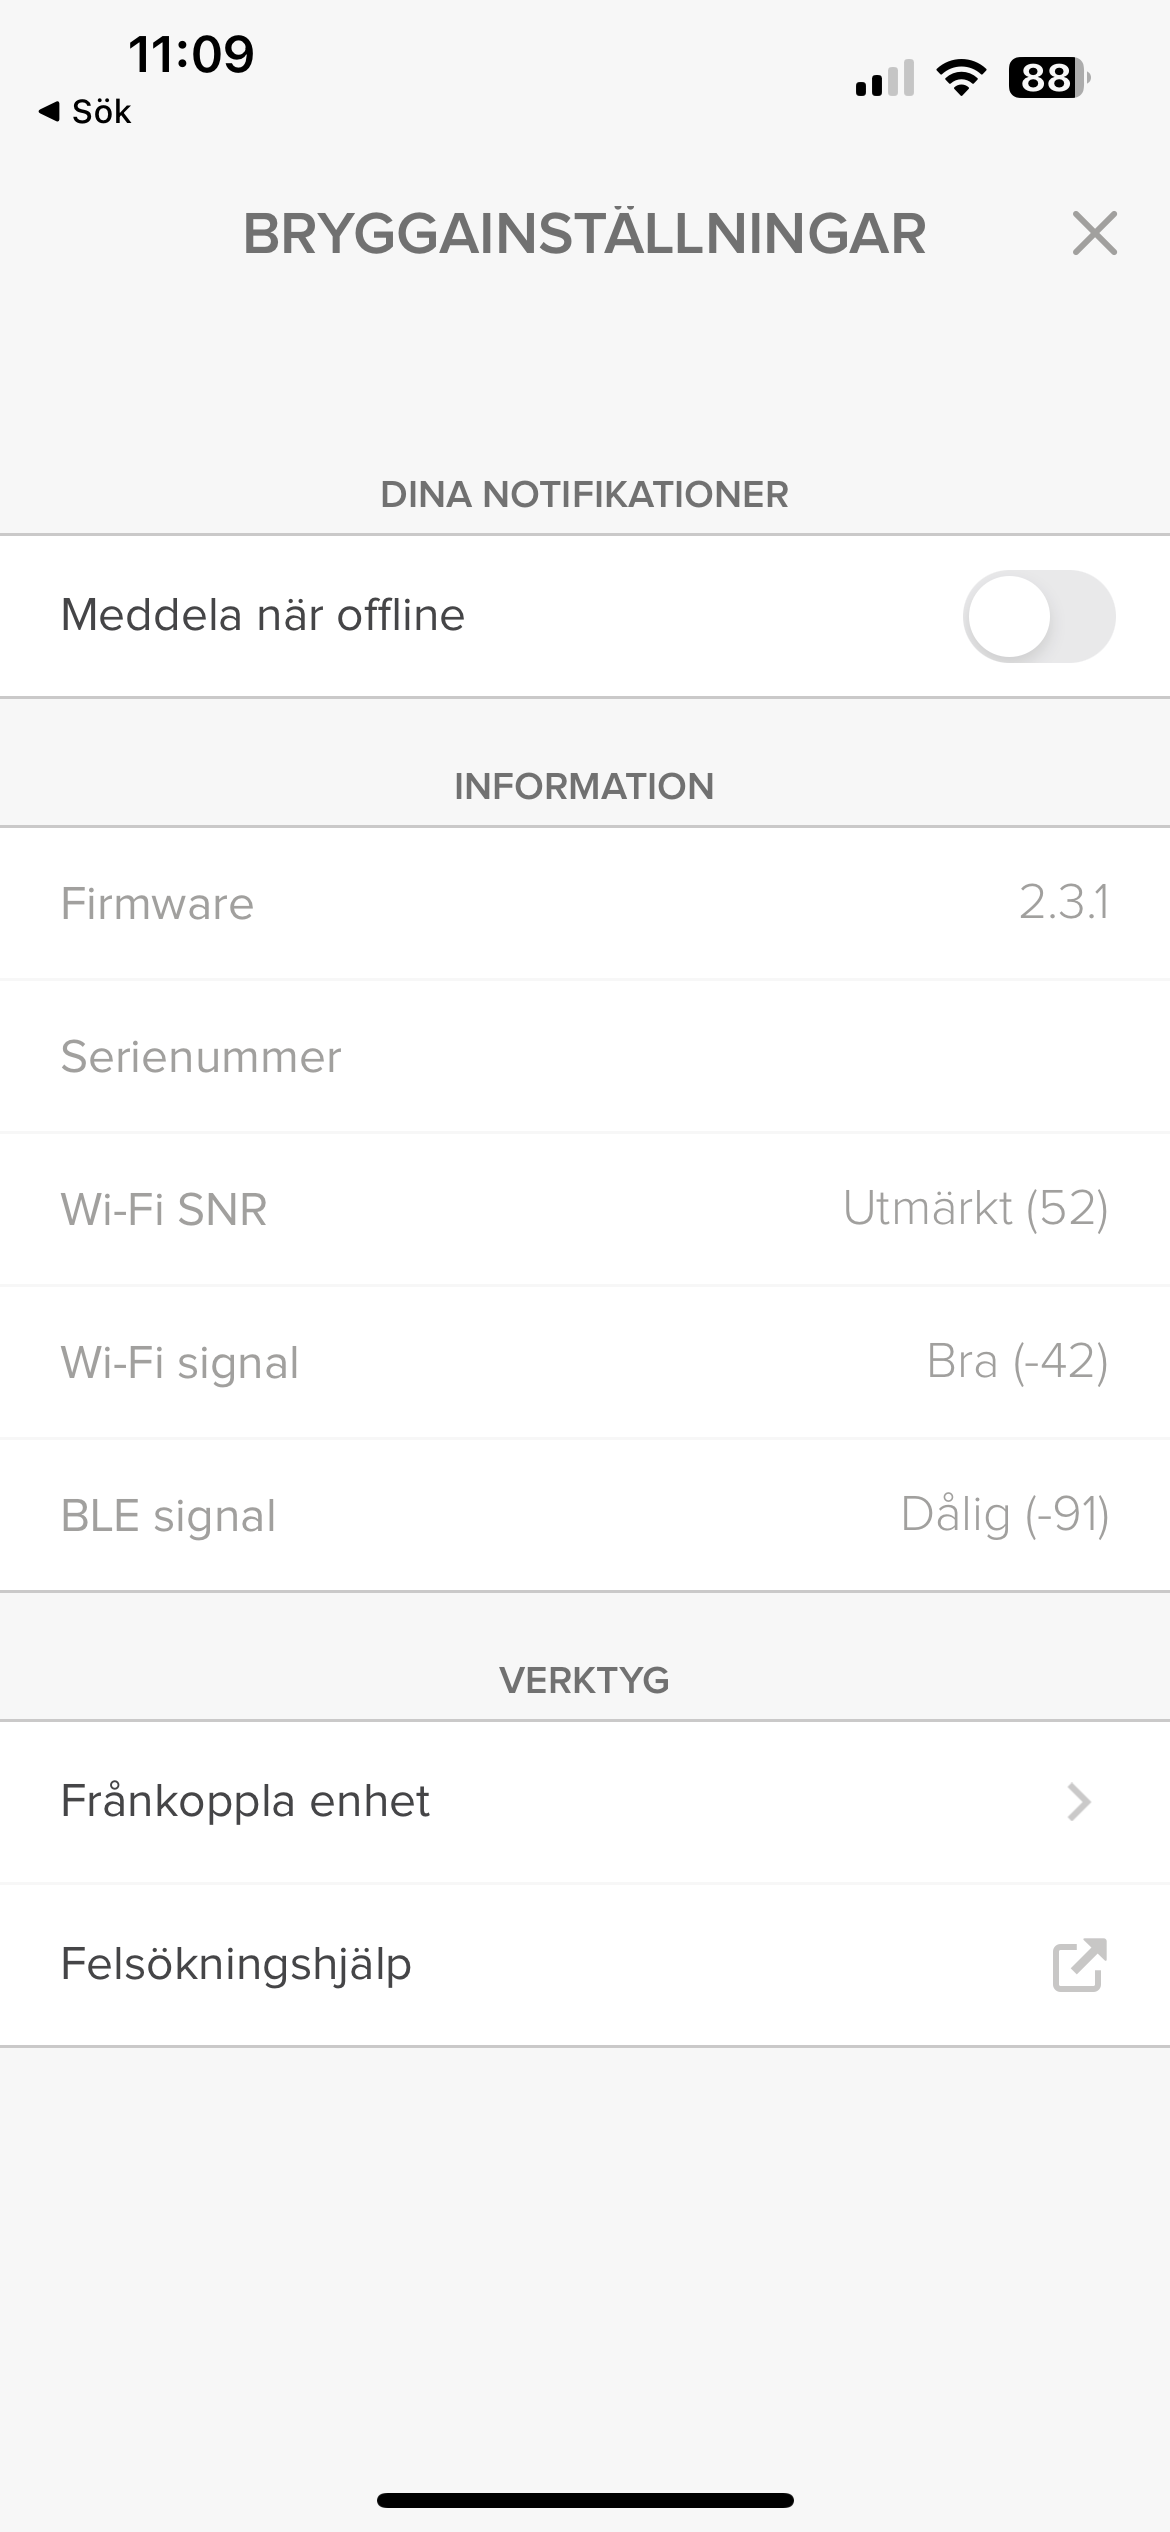 Bad BLE signal and good WiFi signal